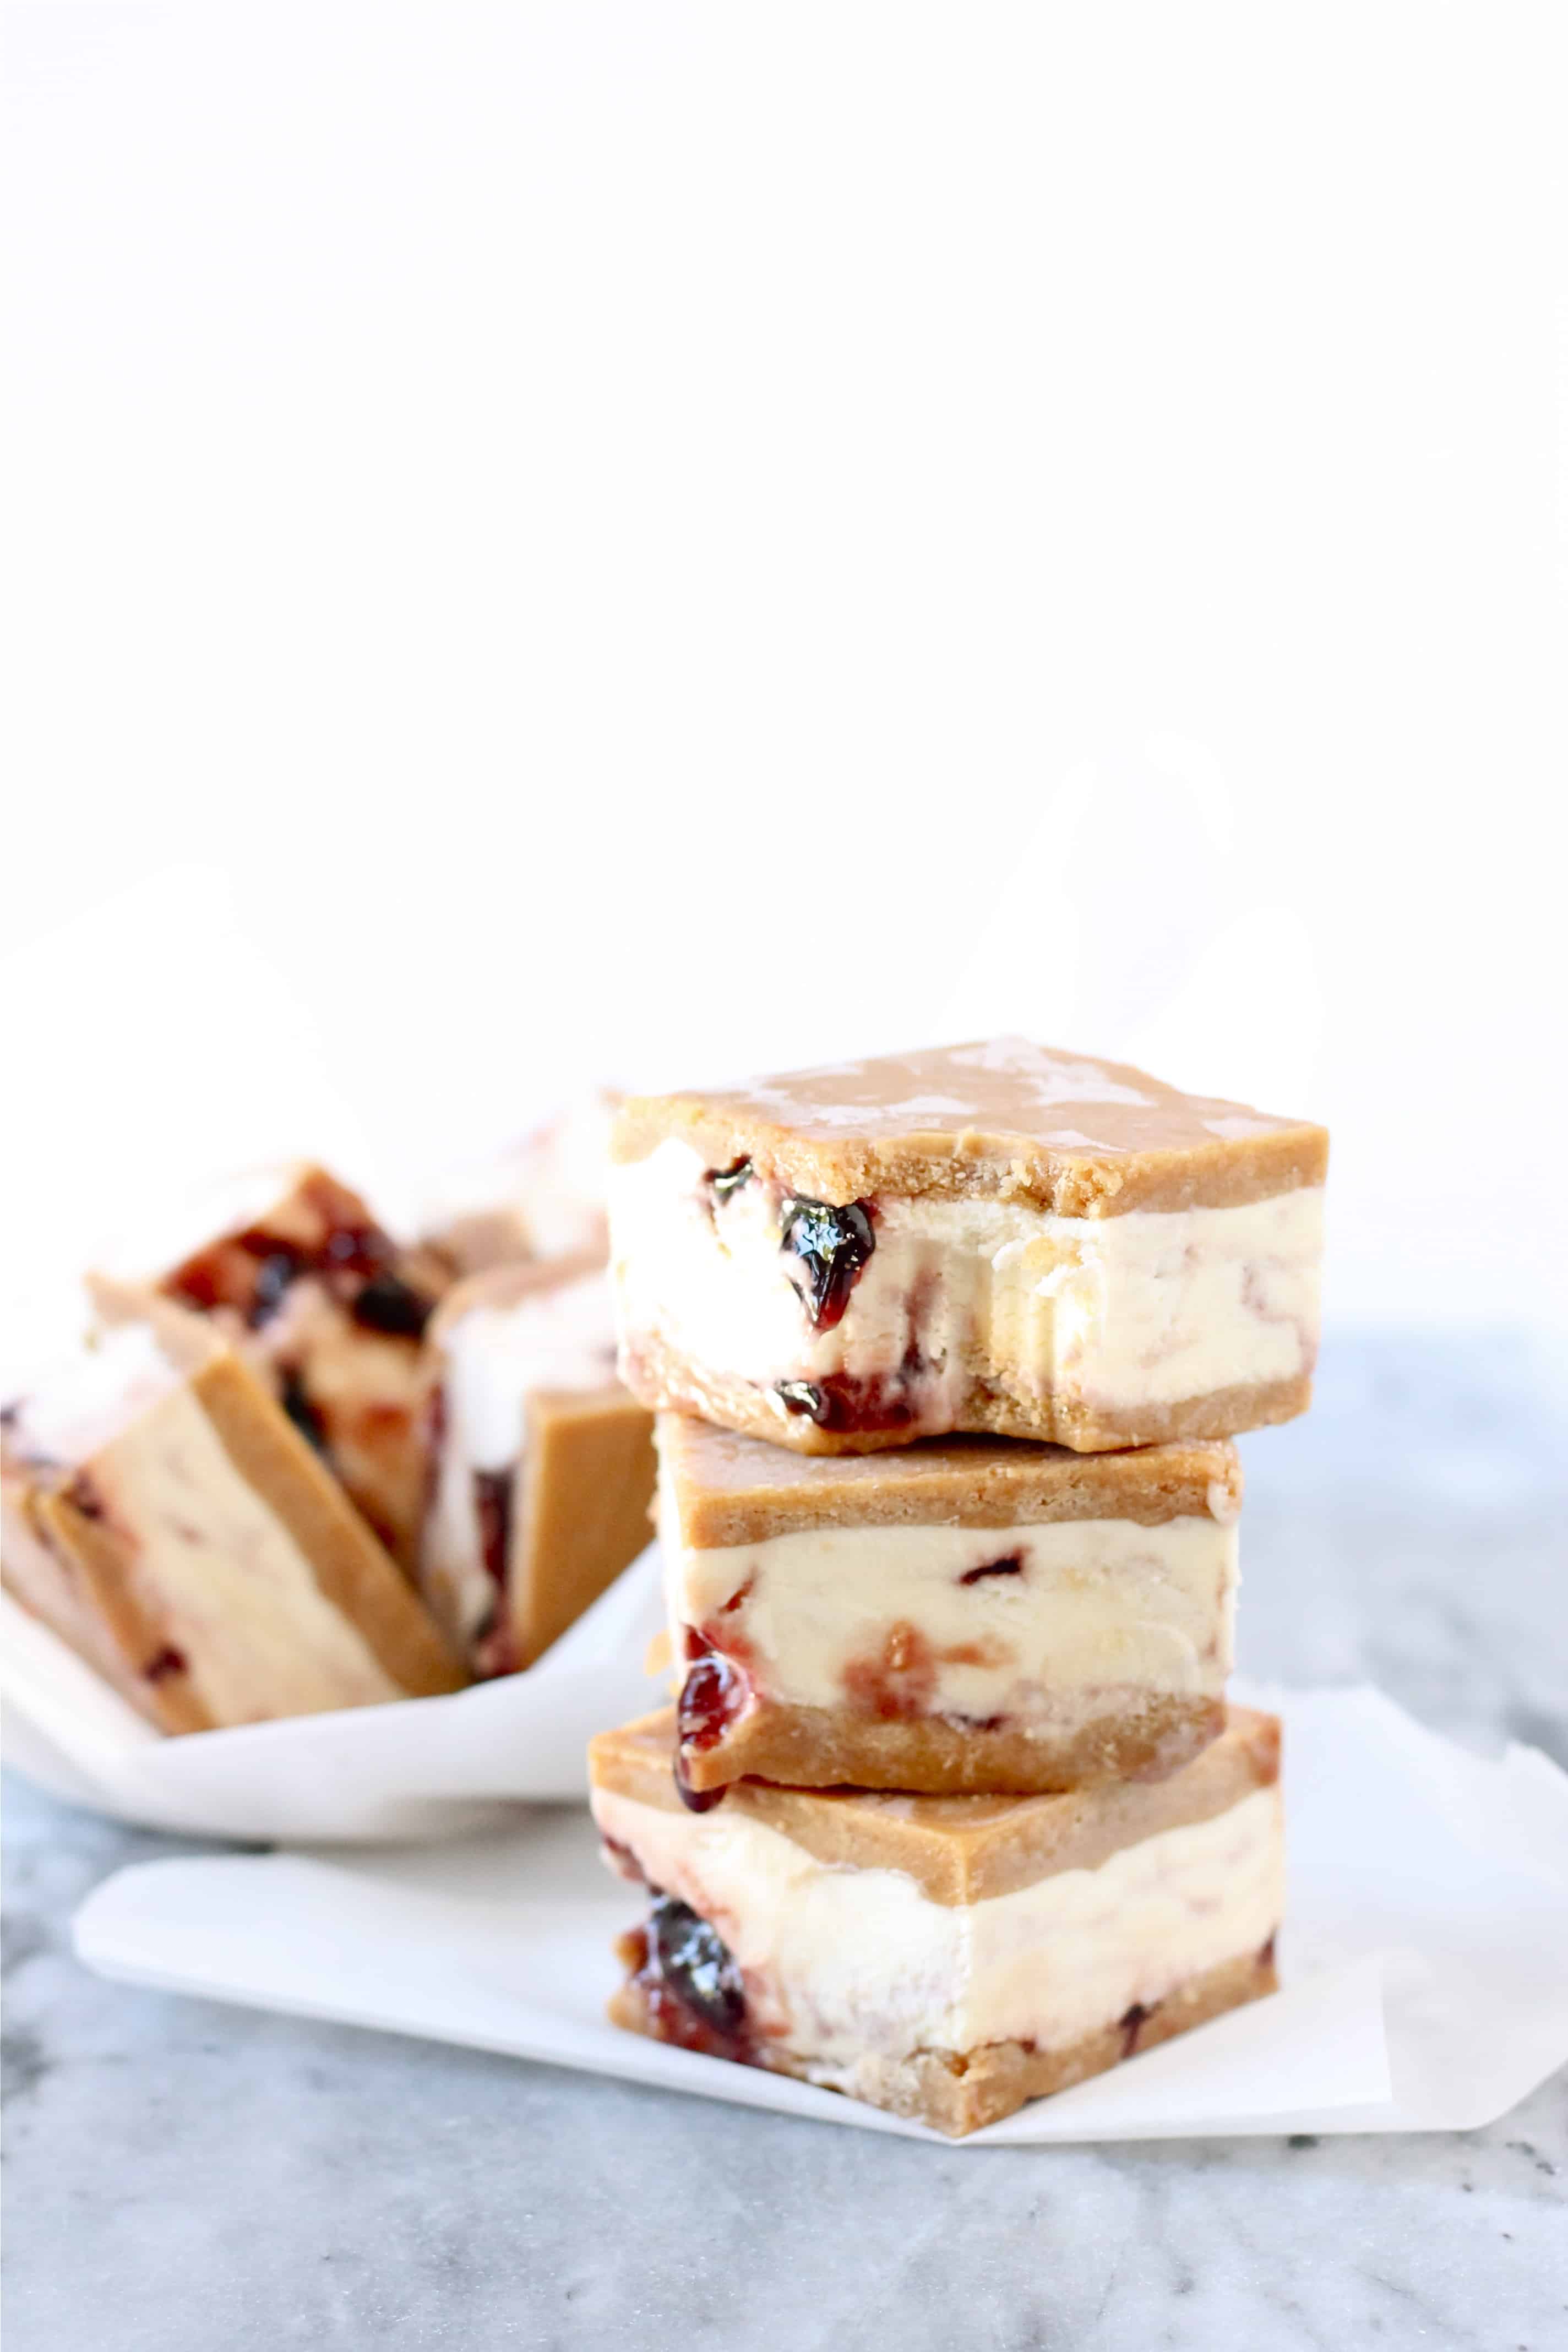 Peanut butter and jelly ice cream sandwiches